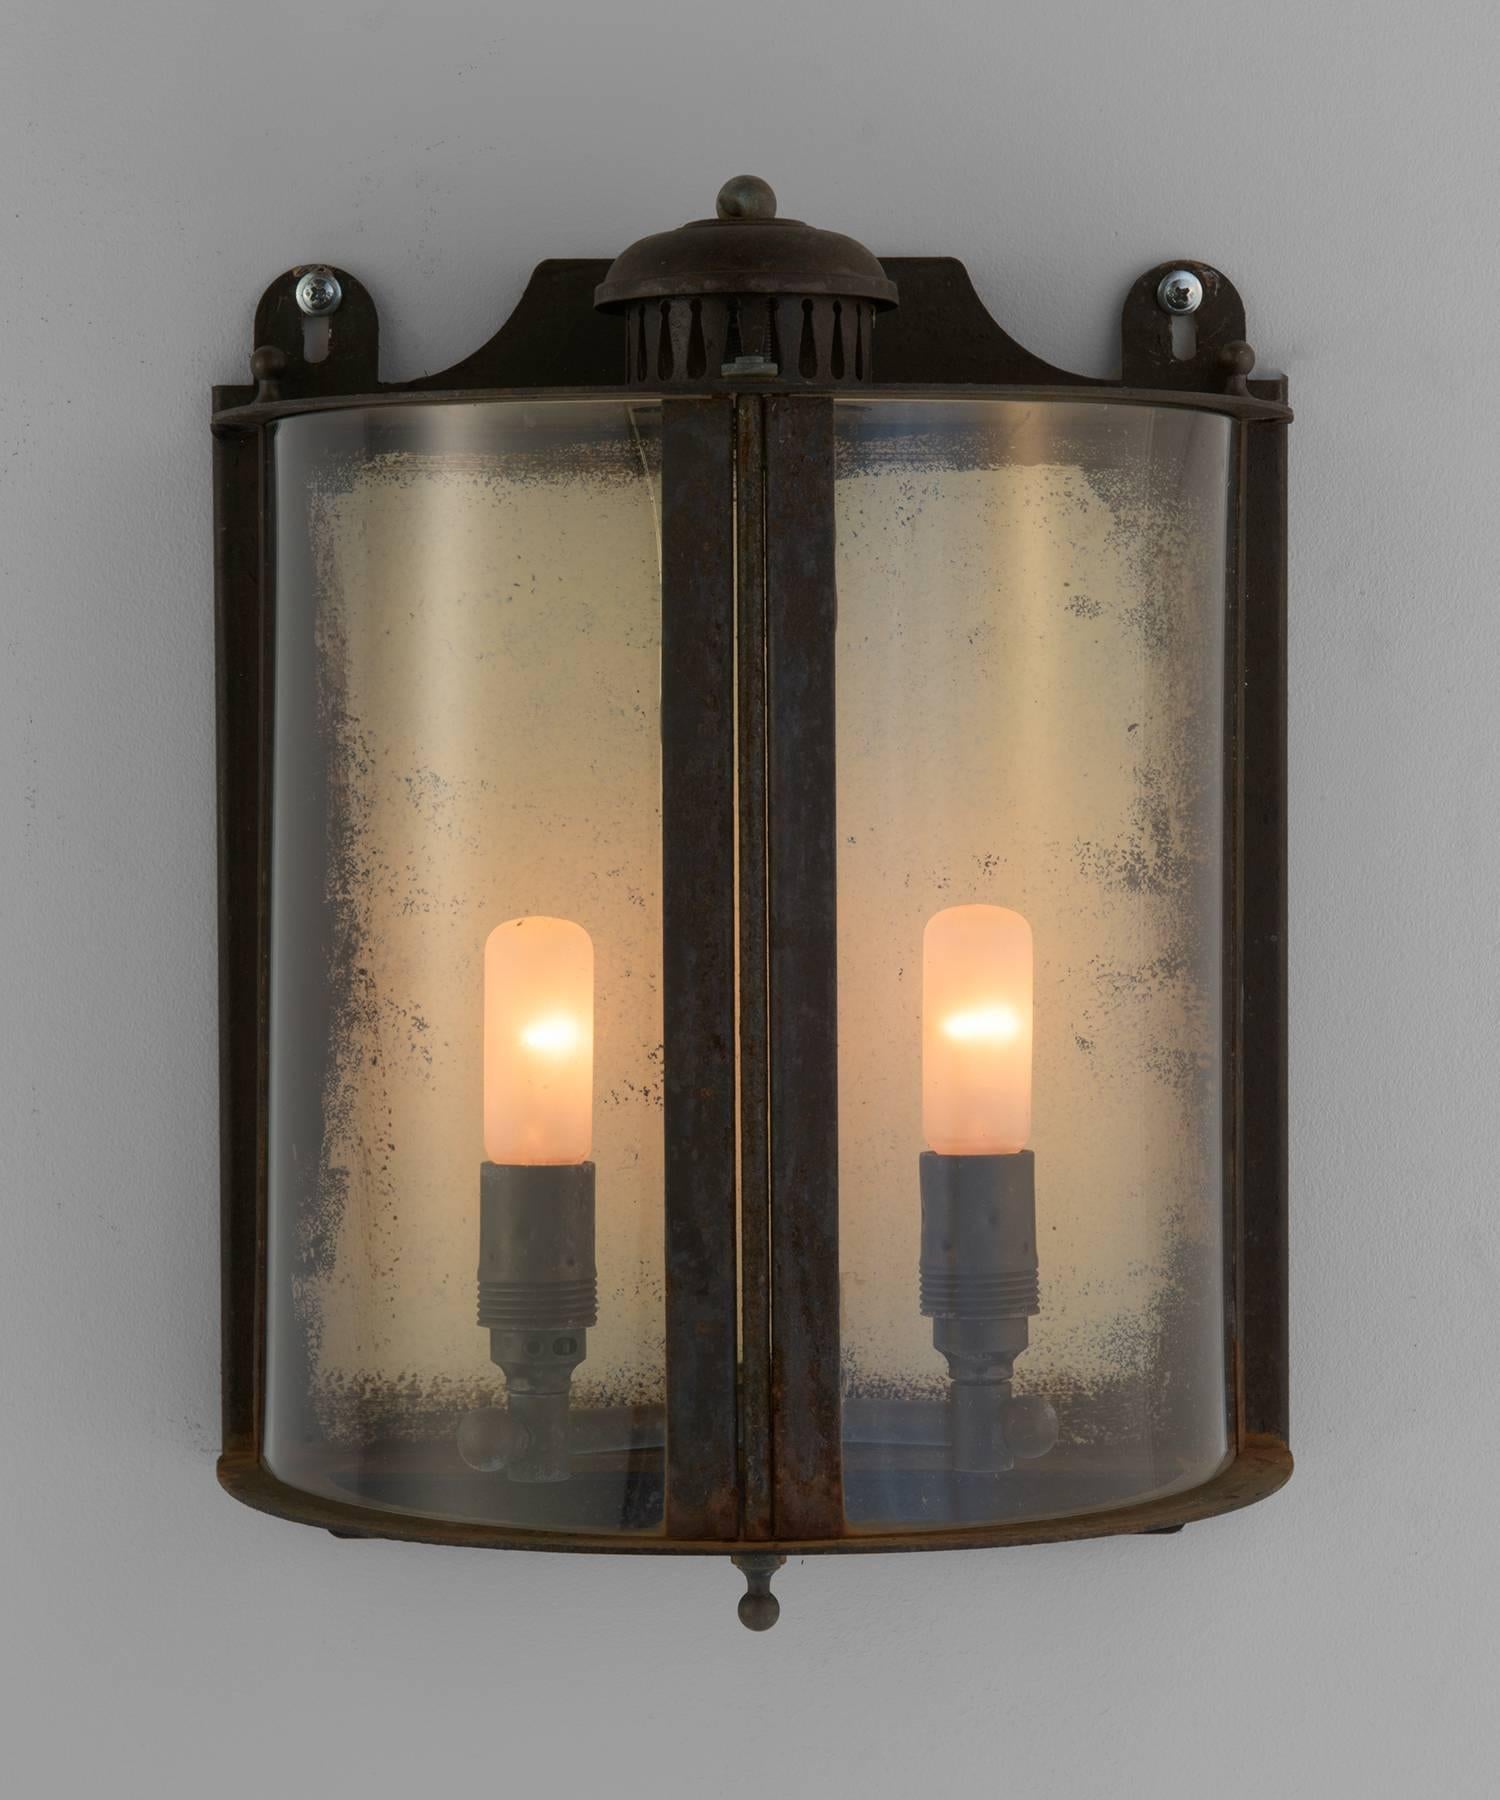 Galvanized Metal and Glass Outdoor Wall Sconce, Made in Italy In New Condition For Sale In Culver City, CA